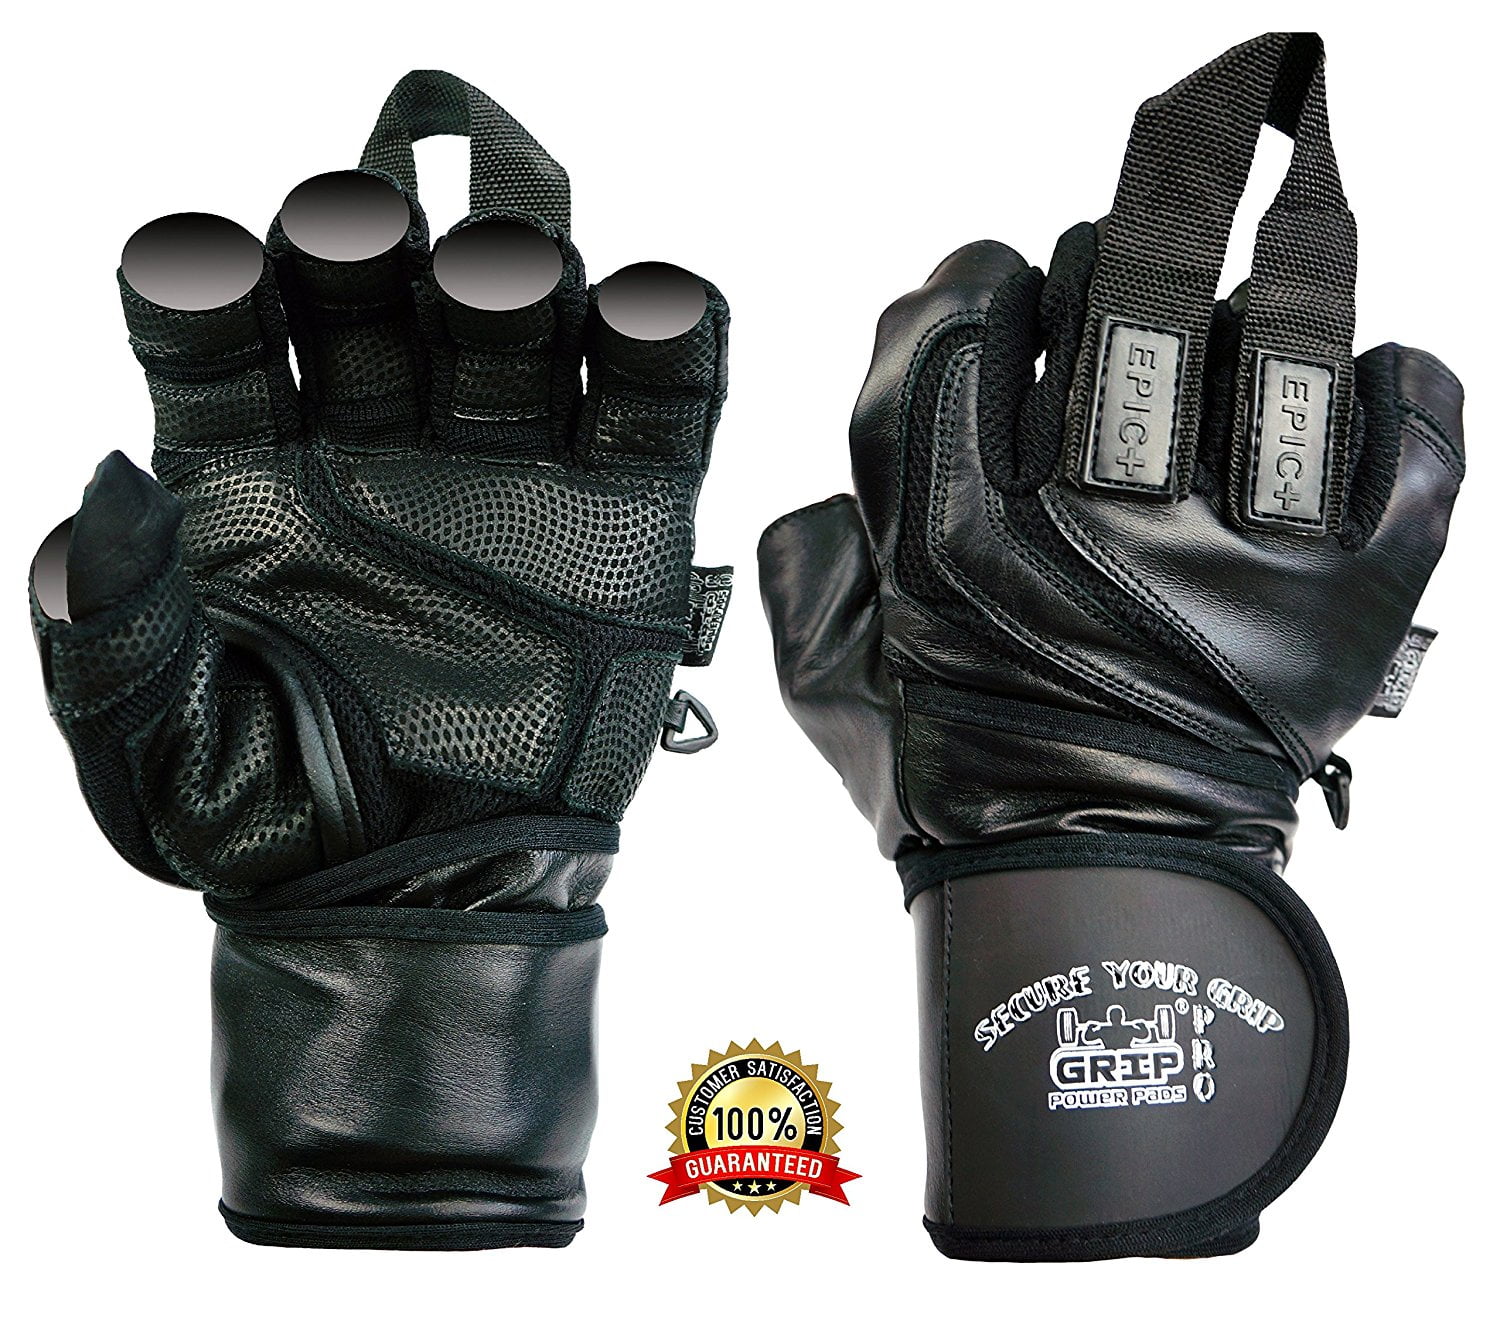 MESH LEATHER GLOVES GYM WEIGHT TRAINING FITNESS POWER LIFTING CYCLING WHEELCHAIR 